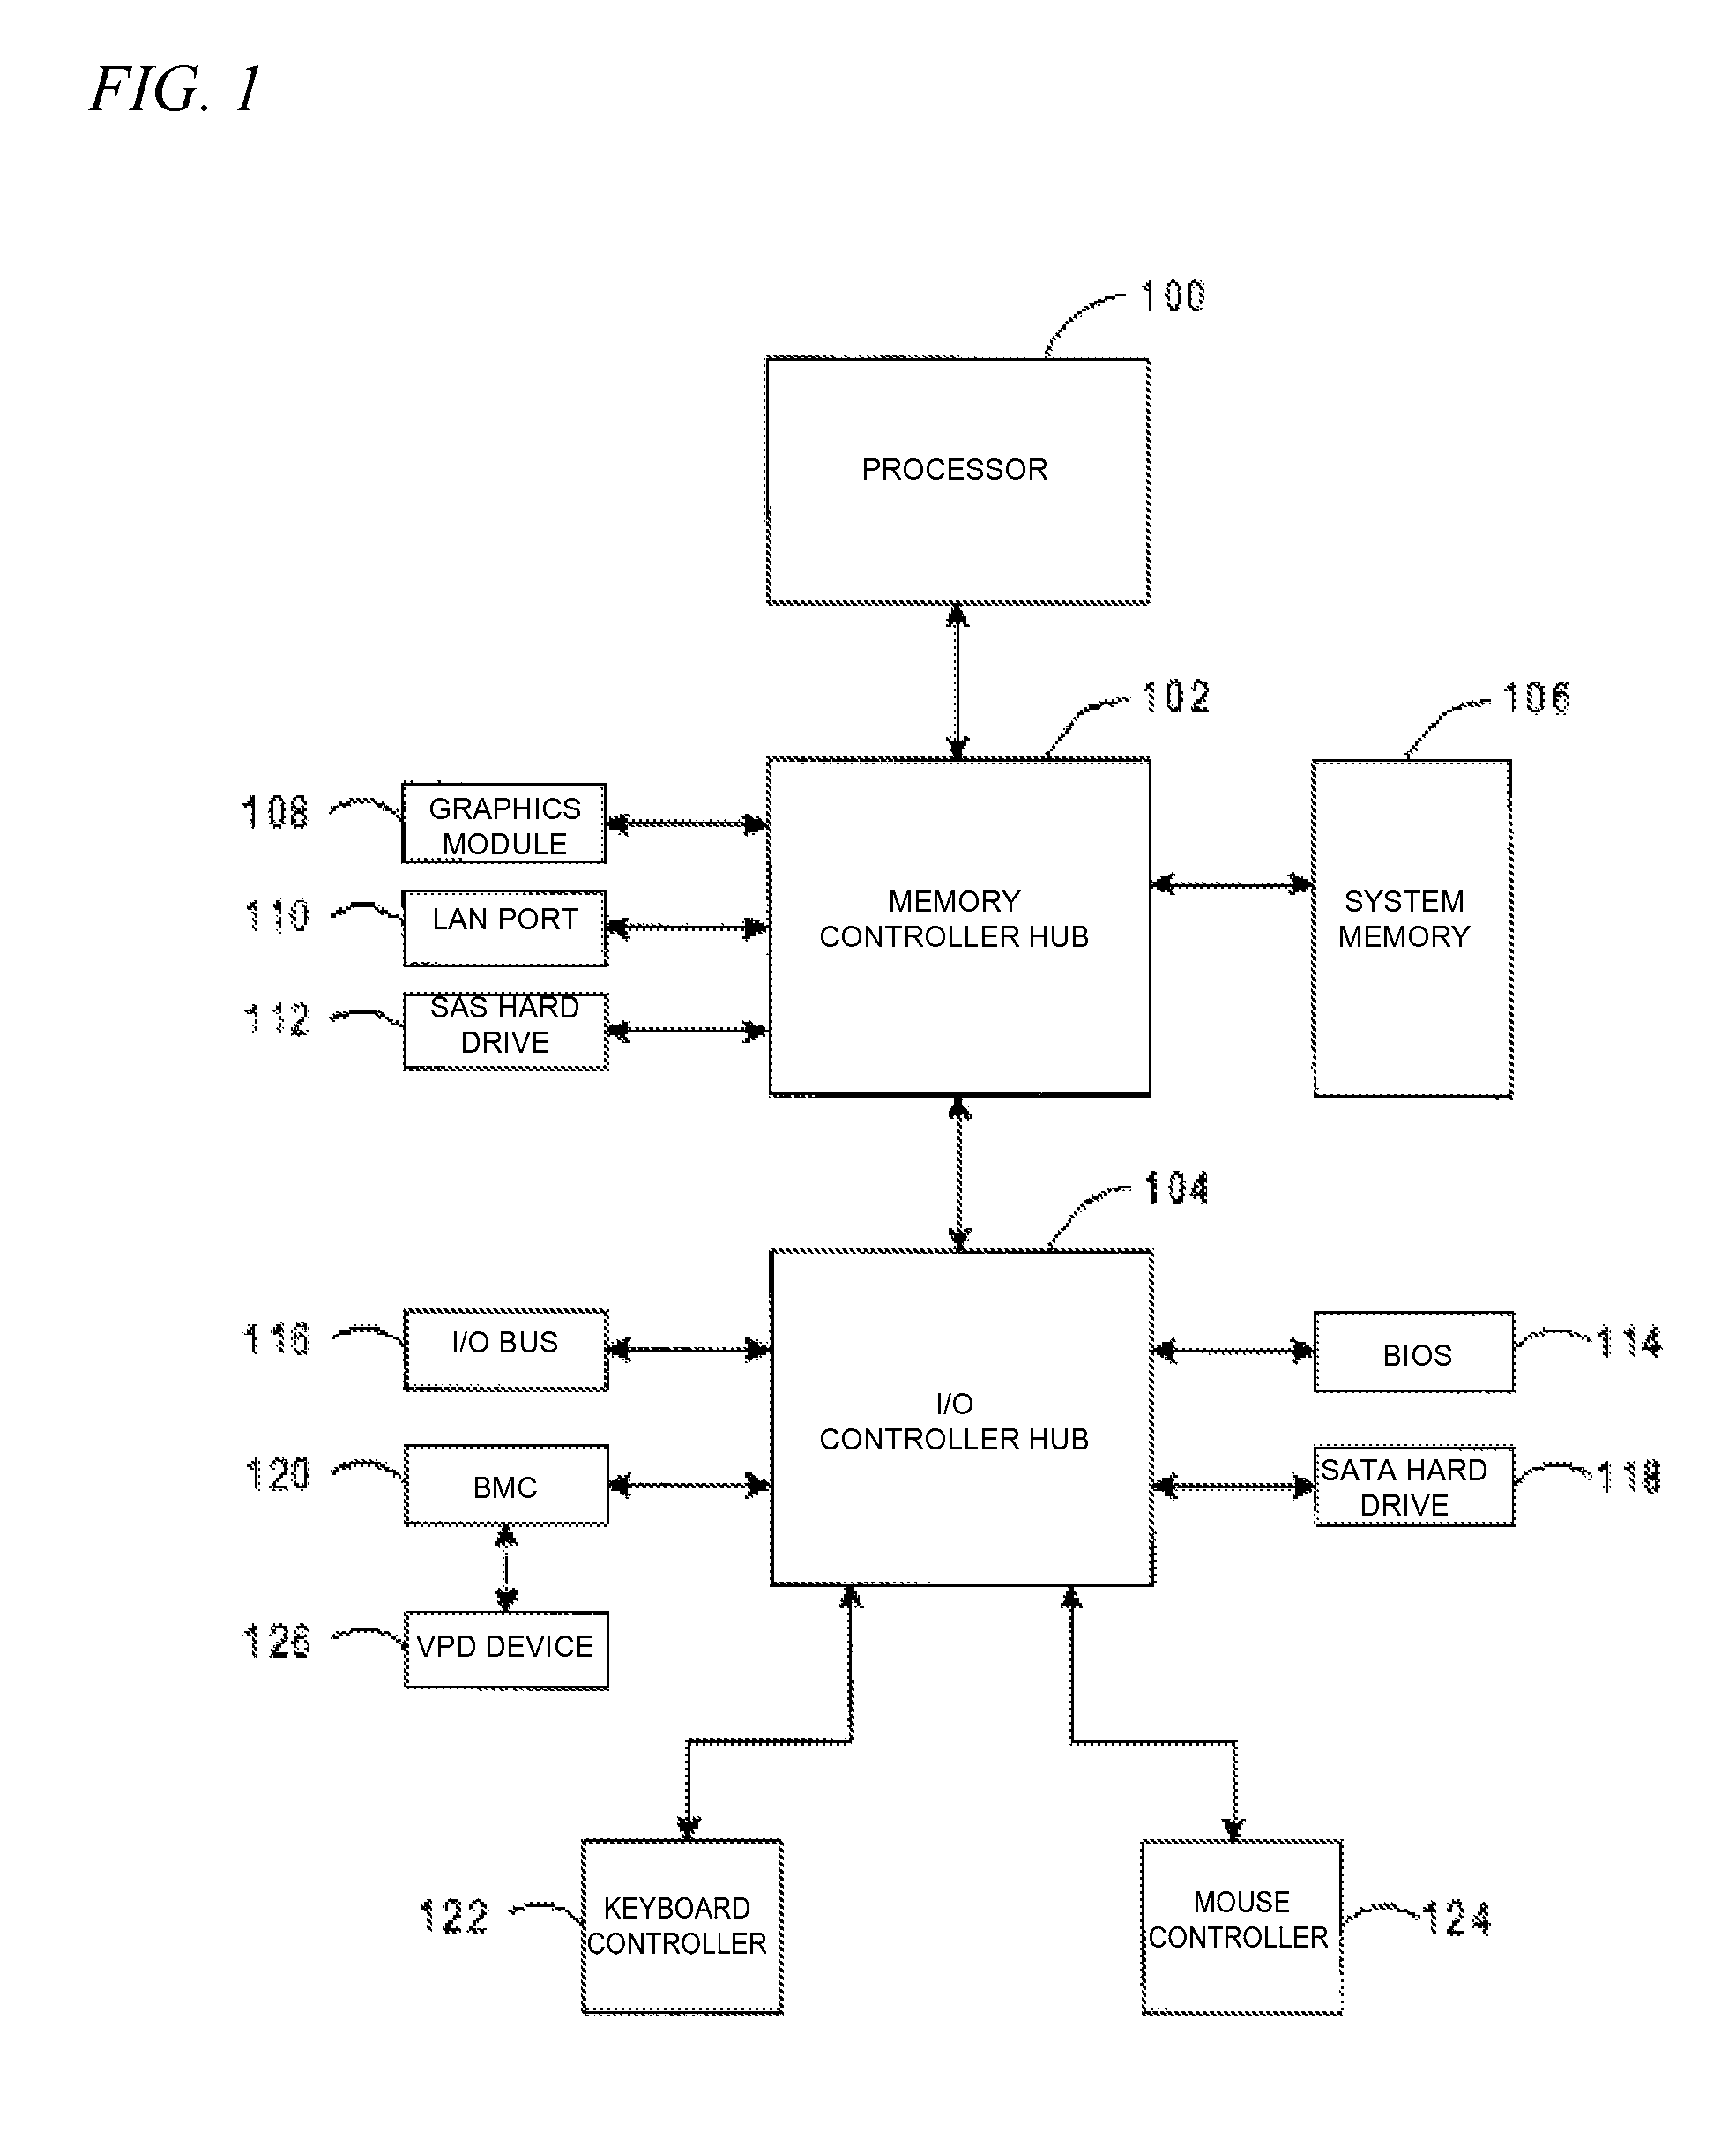 Single system board with automatic feature selection based on installed configuration selection unit